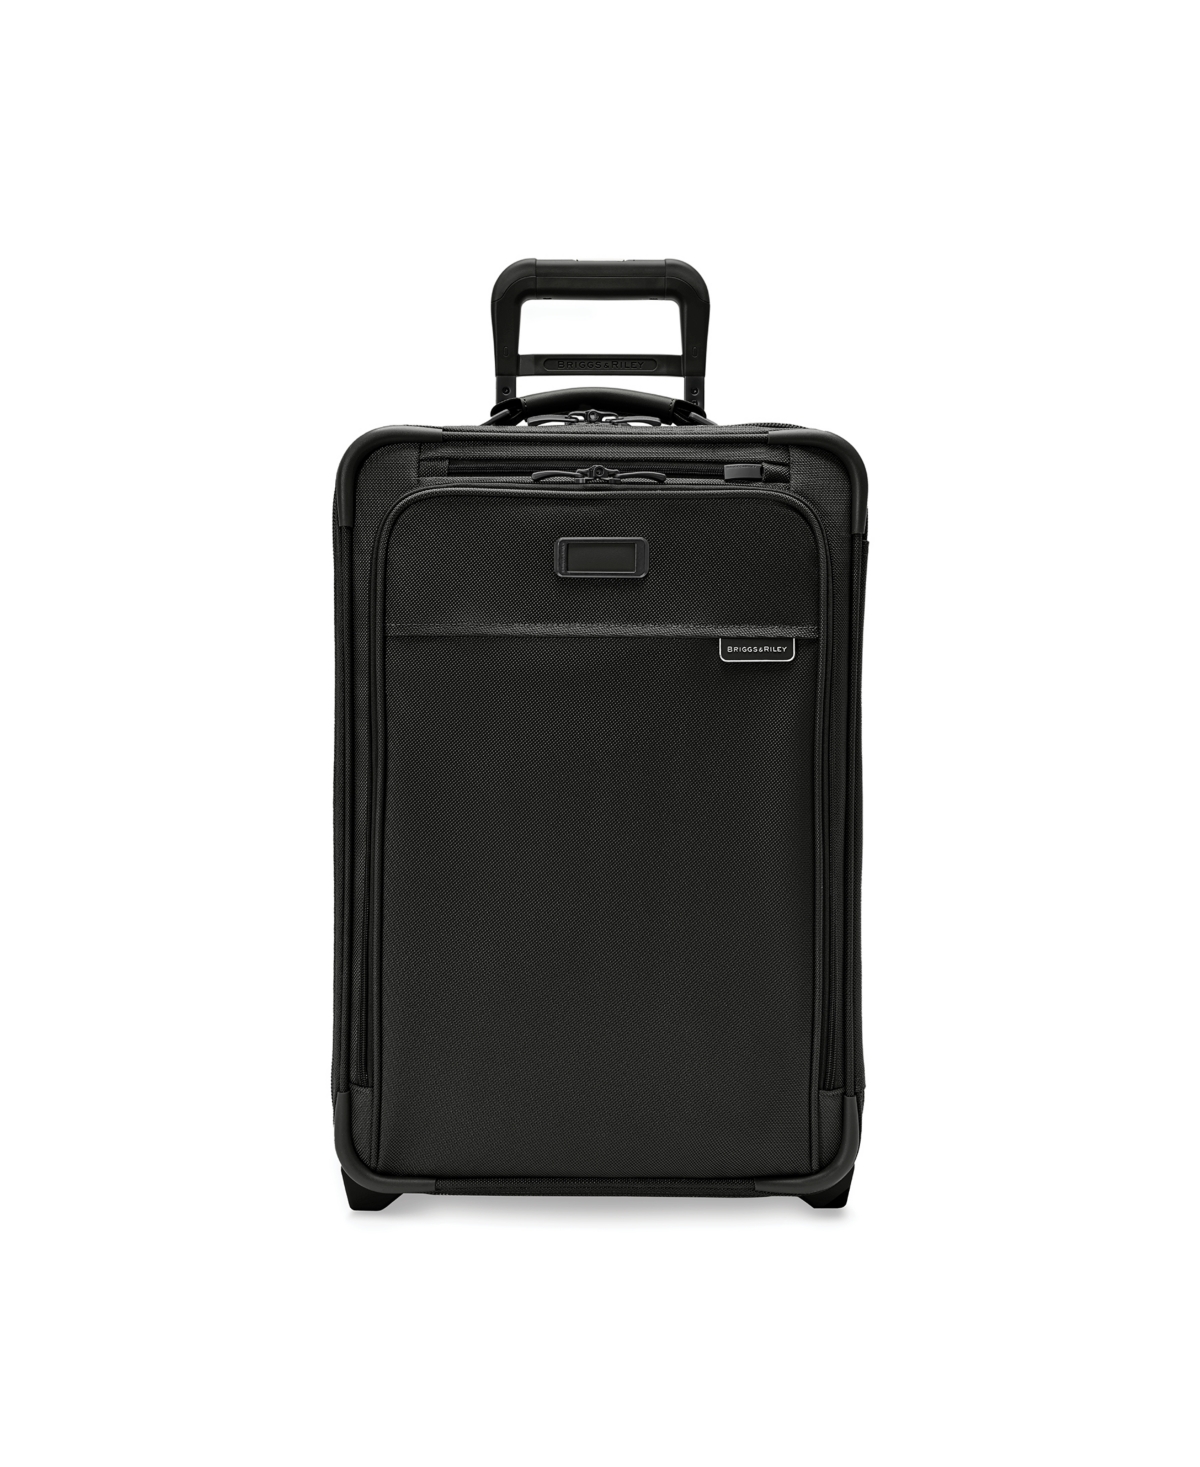 Baseline Essential 2-Wheel Carry-On - Olive